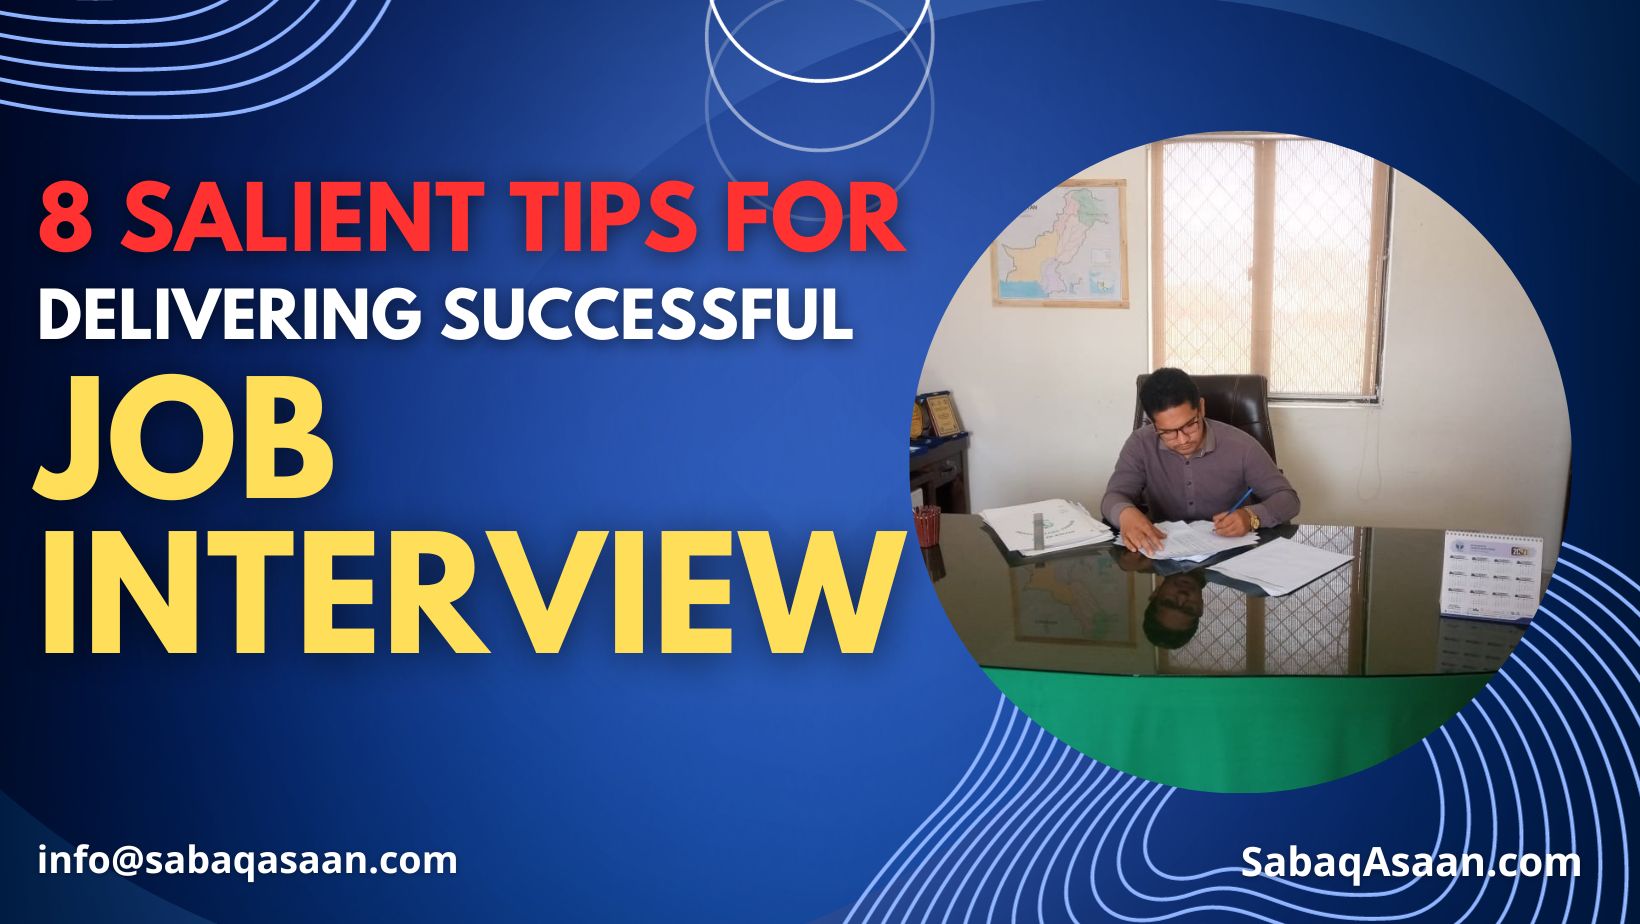 8 salient tips for delivering successful job interview